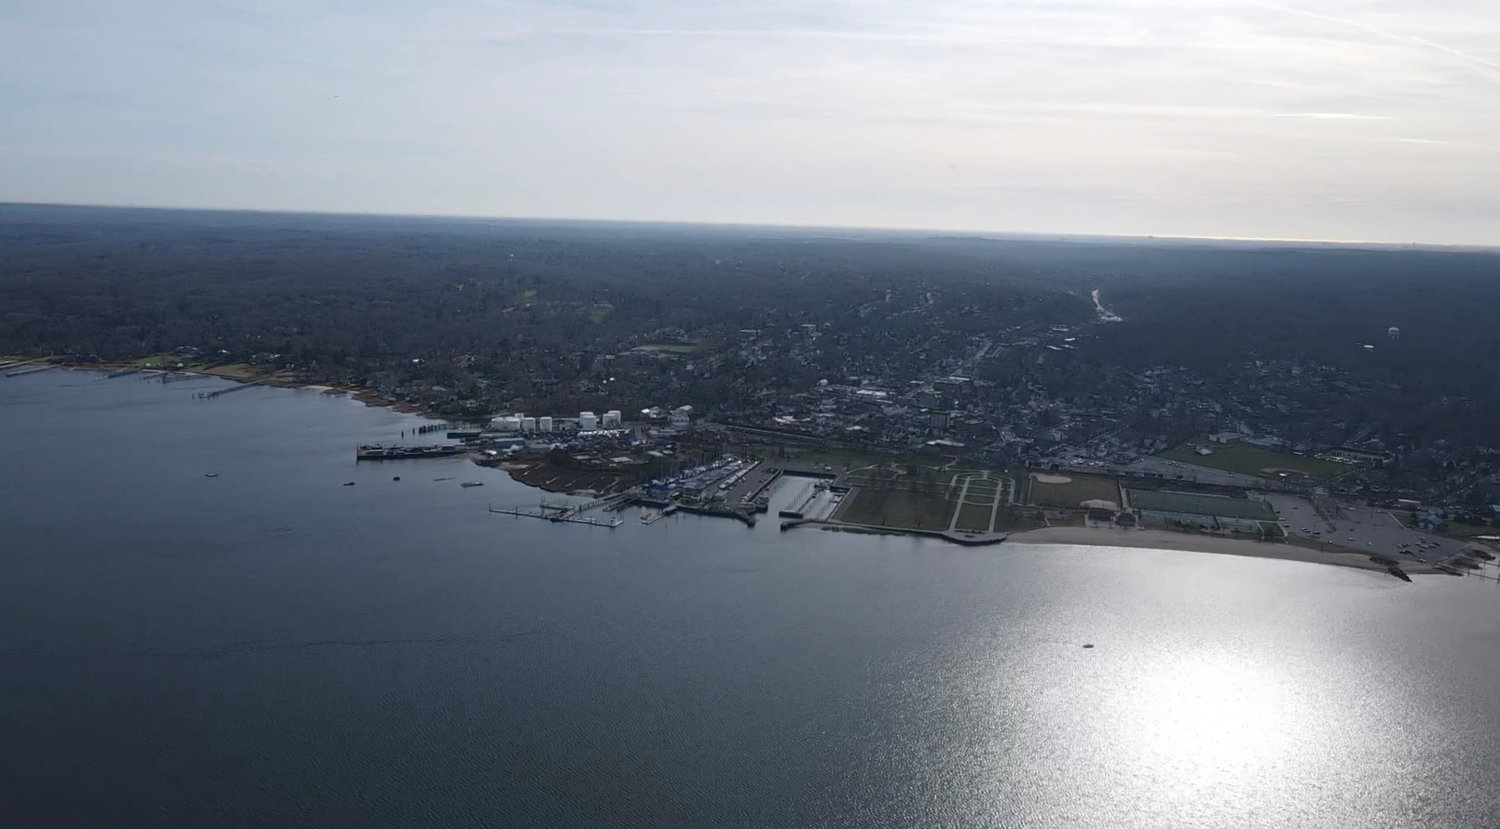 Drones can take high-quality aerial shots, such as this one of Oyster Bay Harbor.